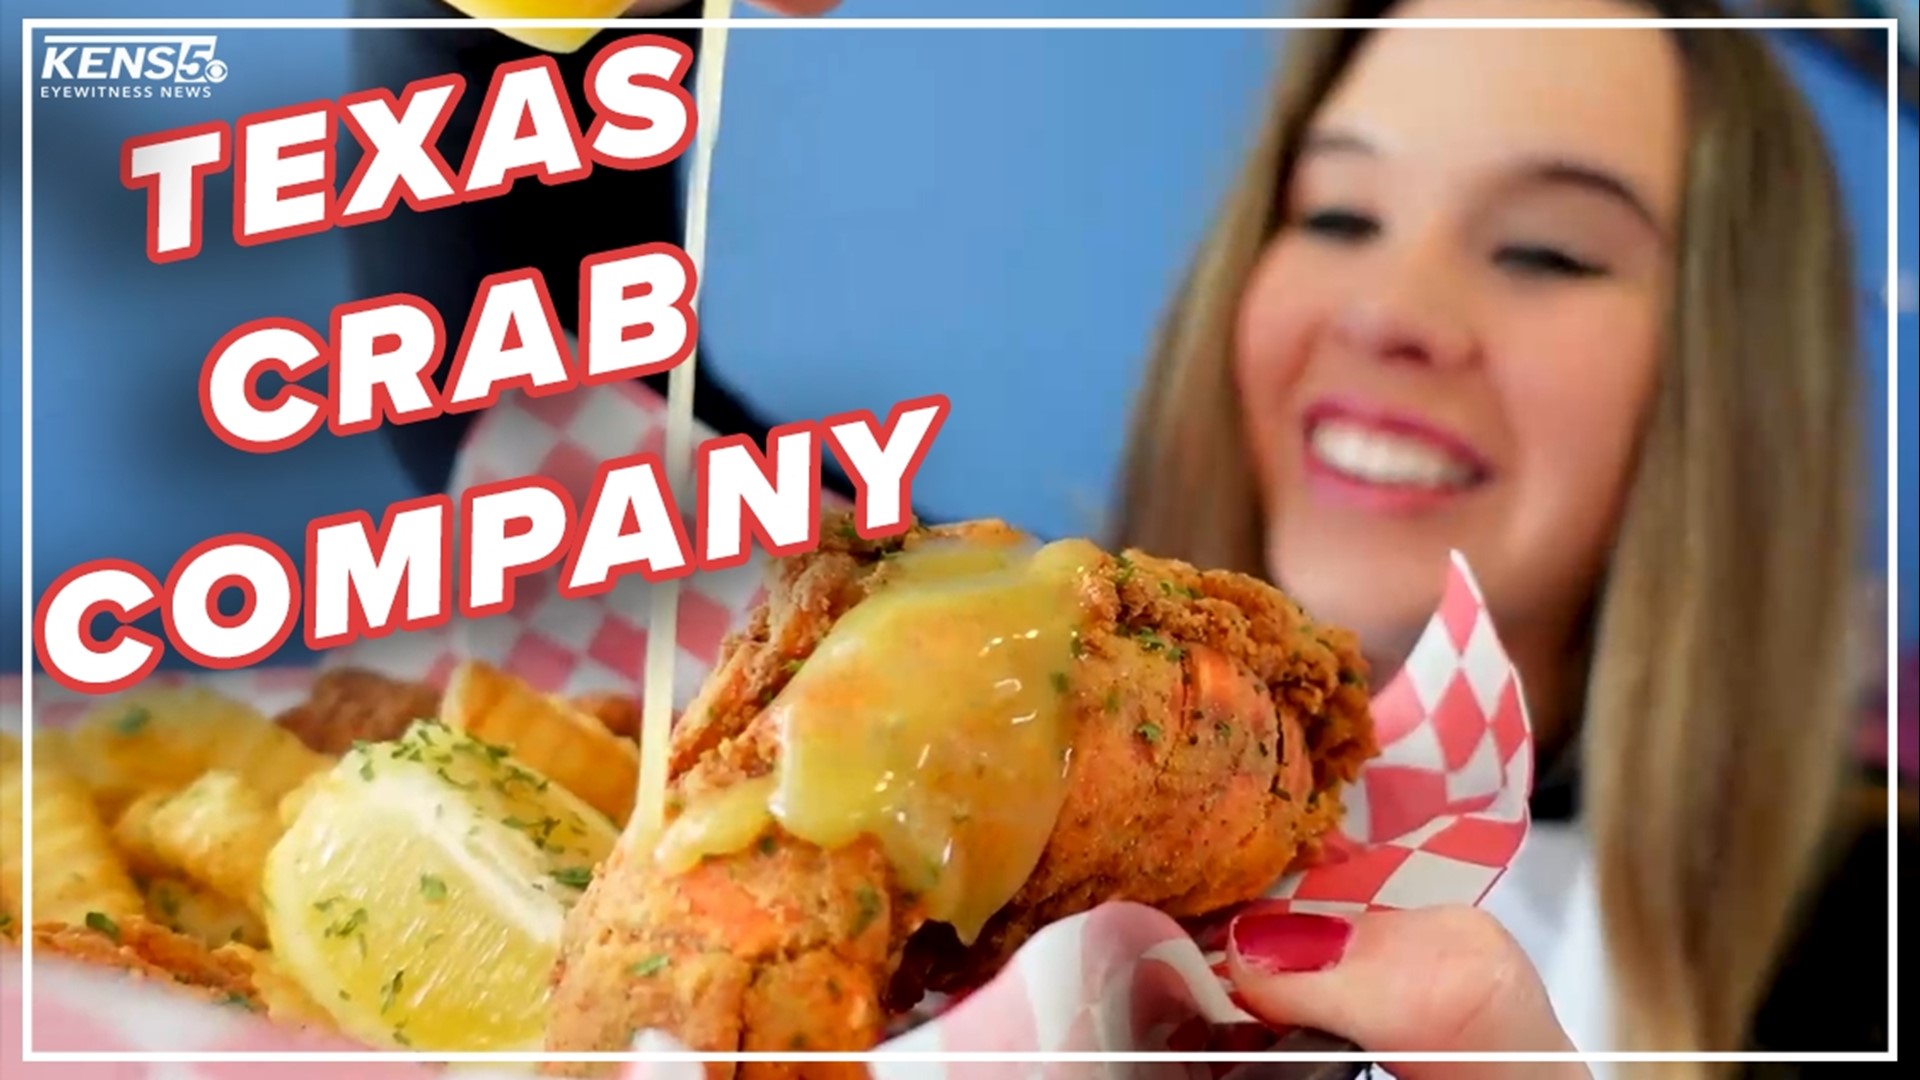 It's called Texas Crab Company. They classify their food as "Cajun-style," but with a Lone Star State twist.